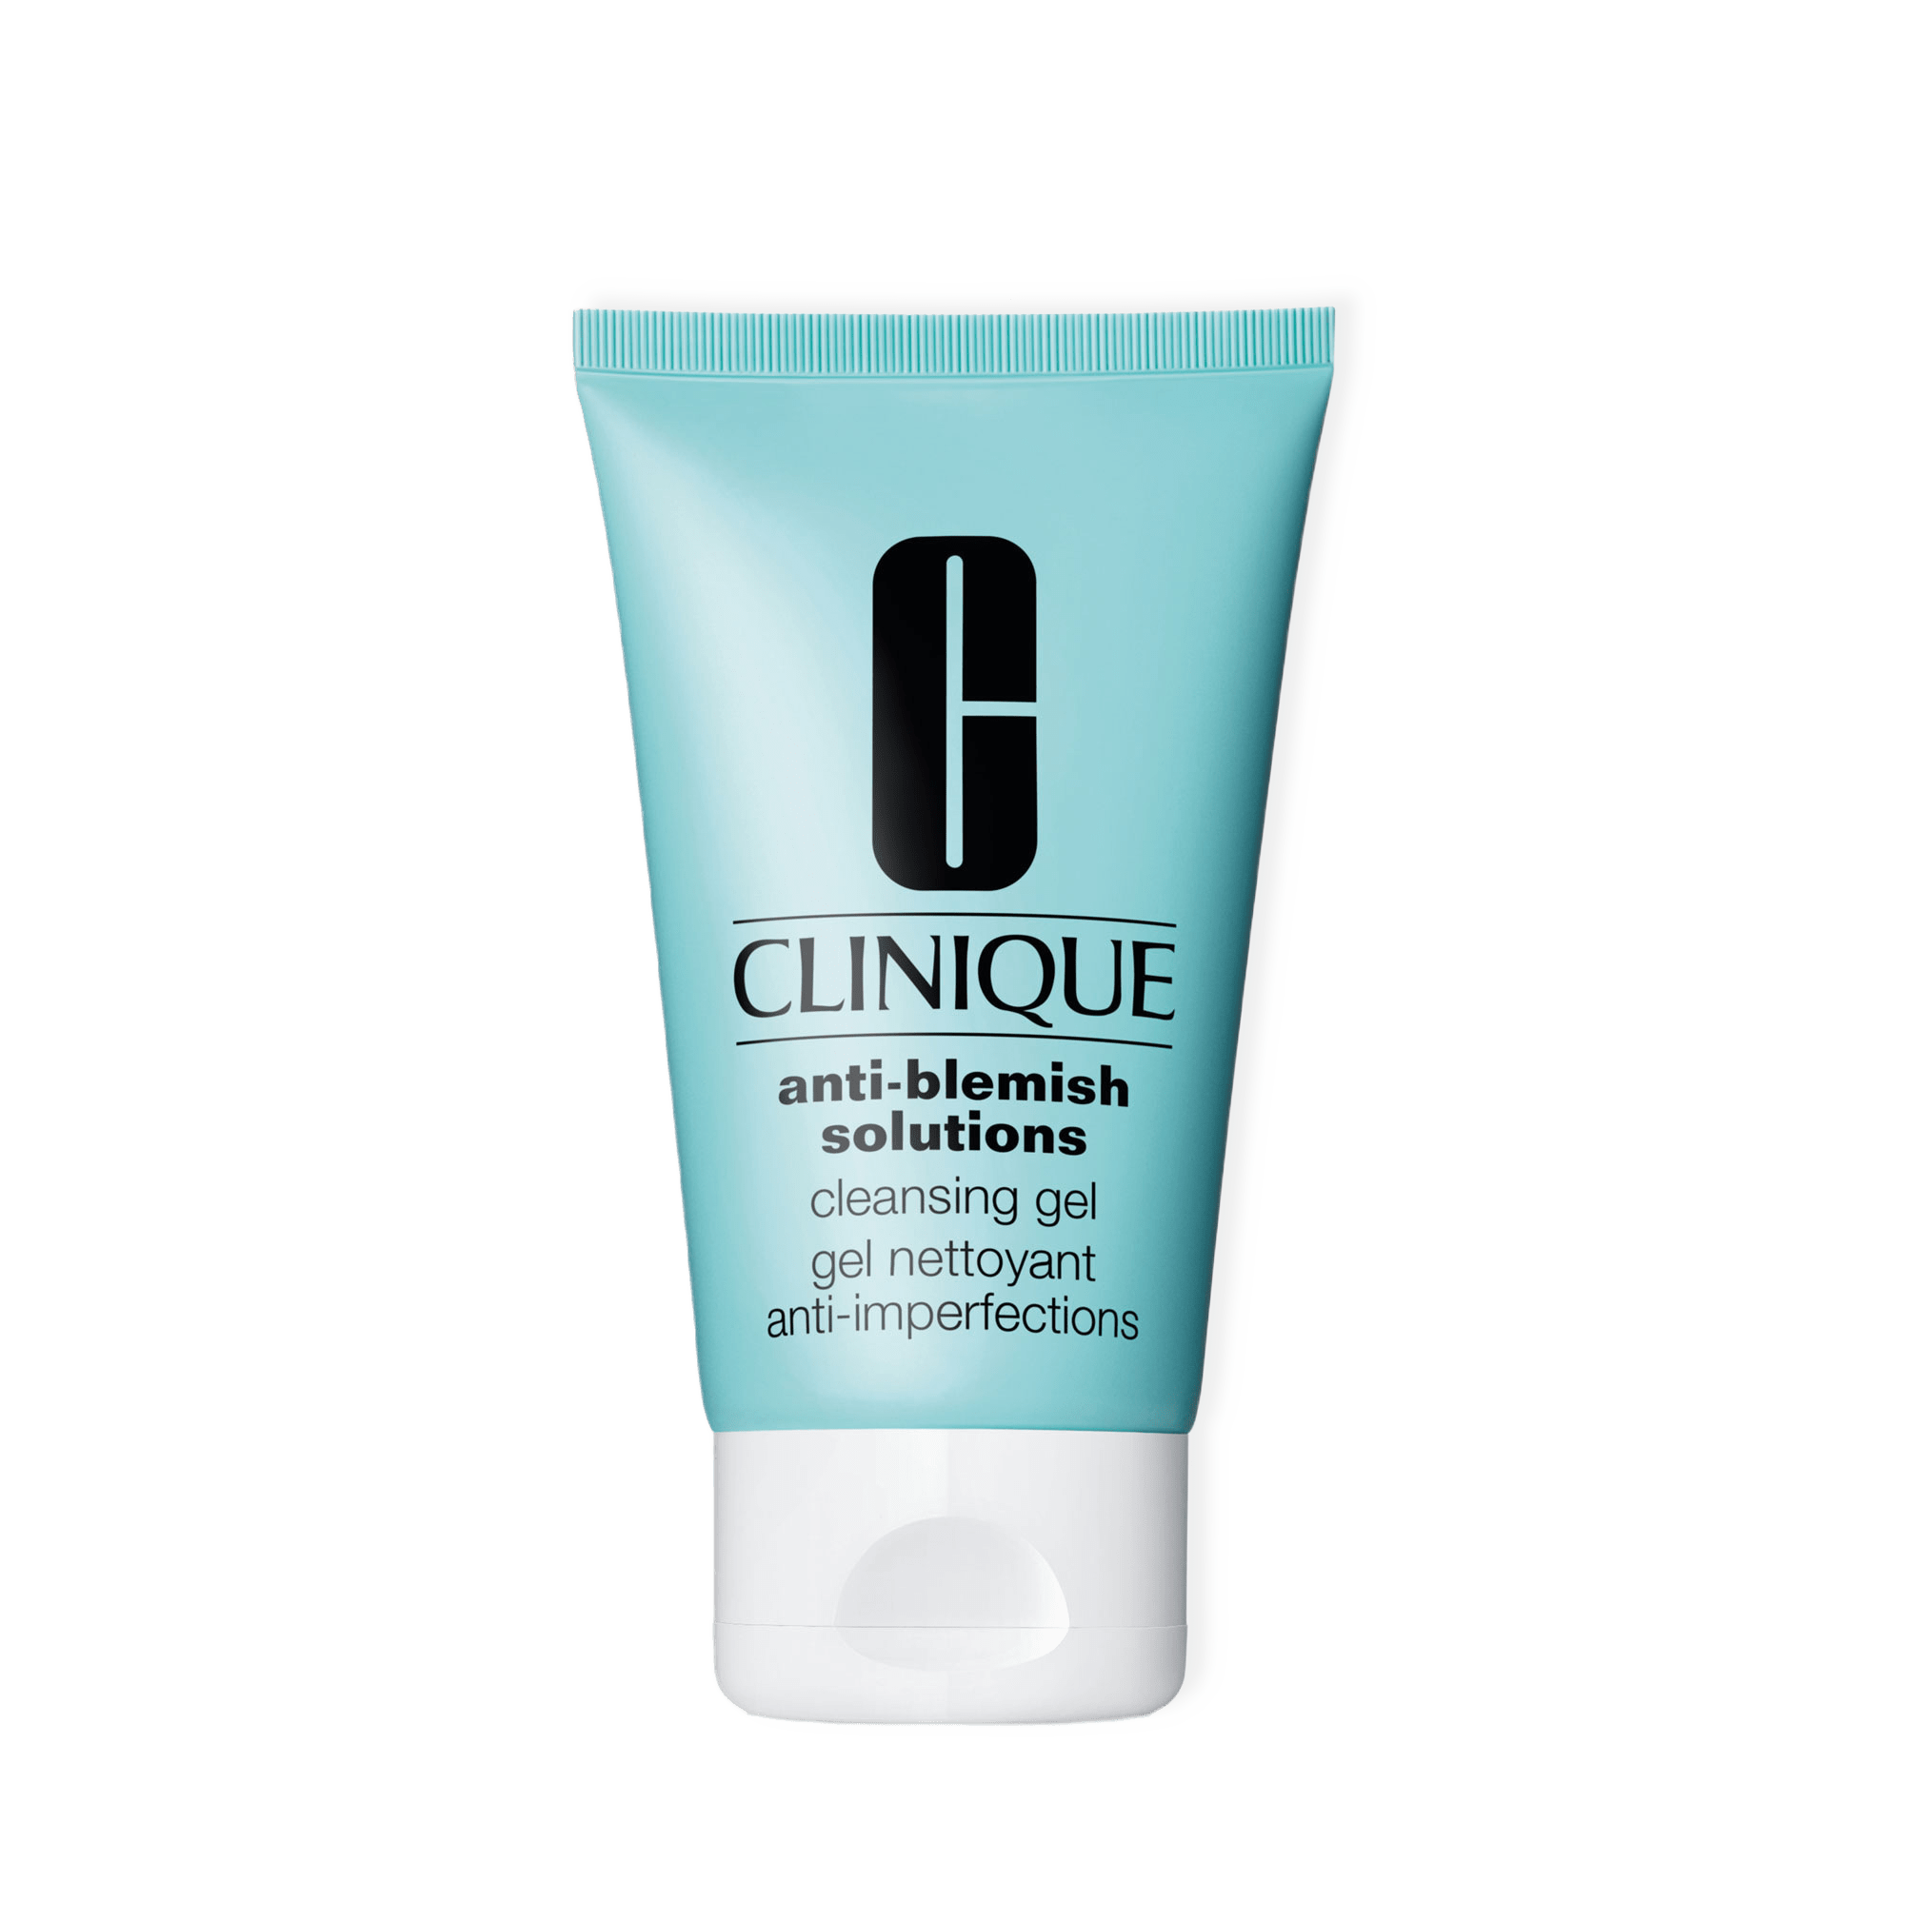 Anti-Blemish Solutions Cleansing Gel från Clinique